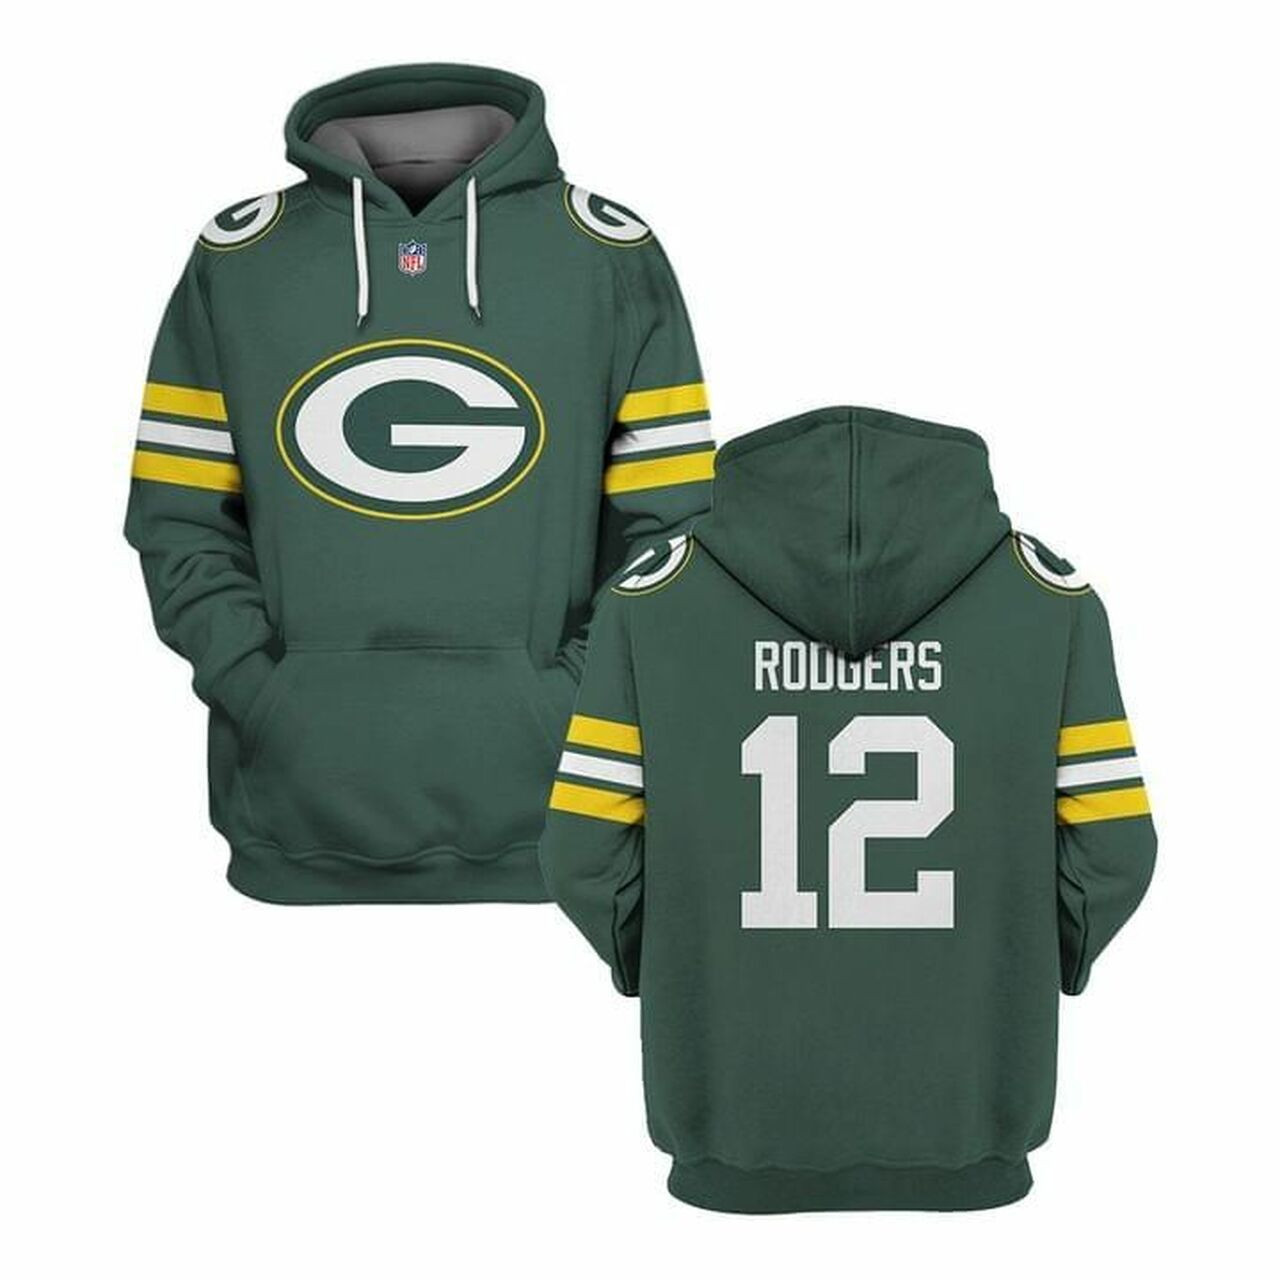 Aaron Rodgers 12 Green Bay Packers Green Jersey 3d Hoodie Sweater Tshirt